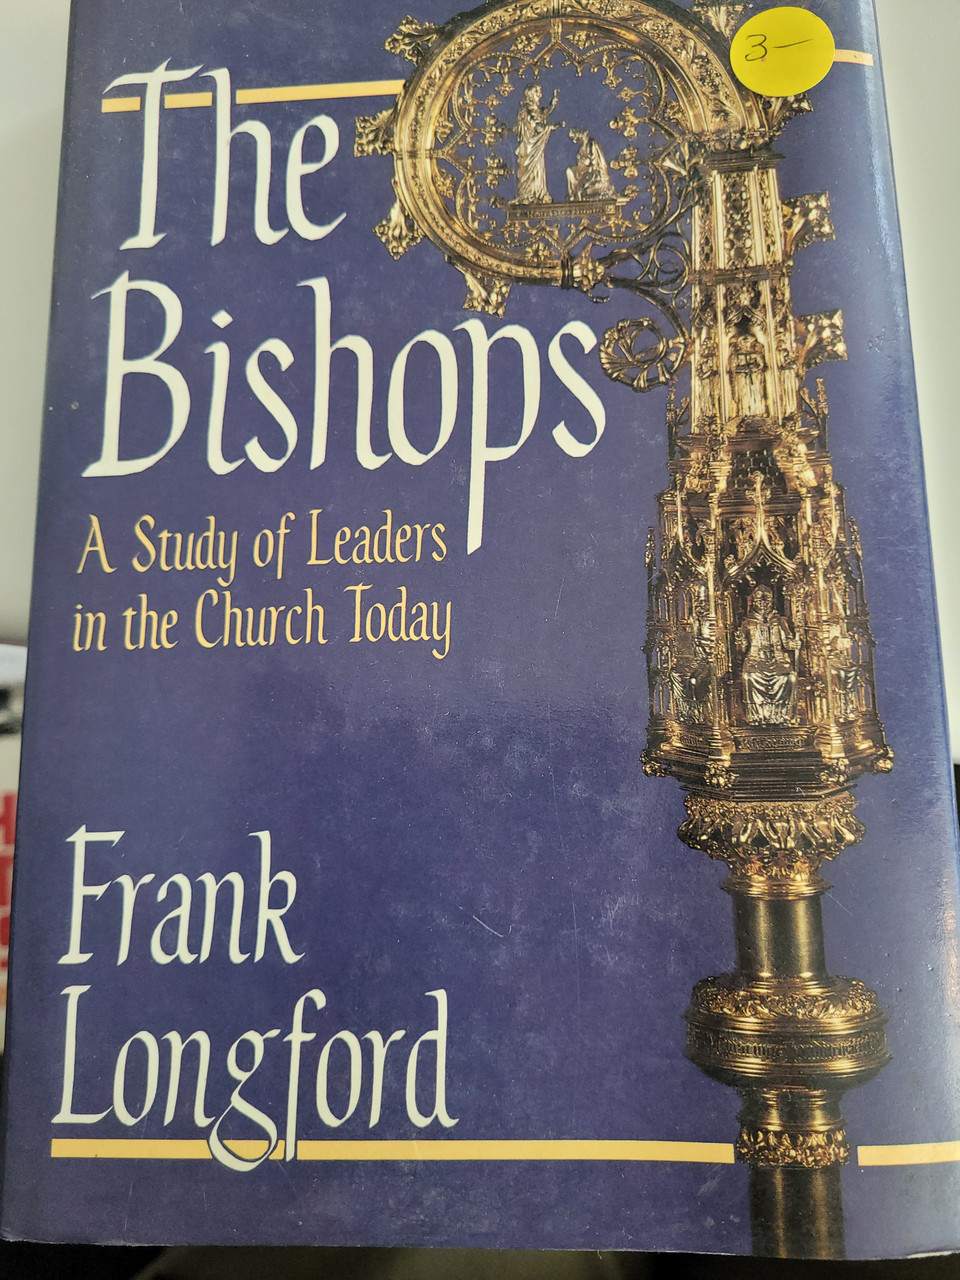 The Bishops A Study of Leaders in the Church Today by Frank Longford